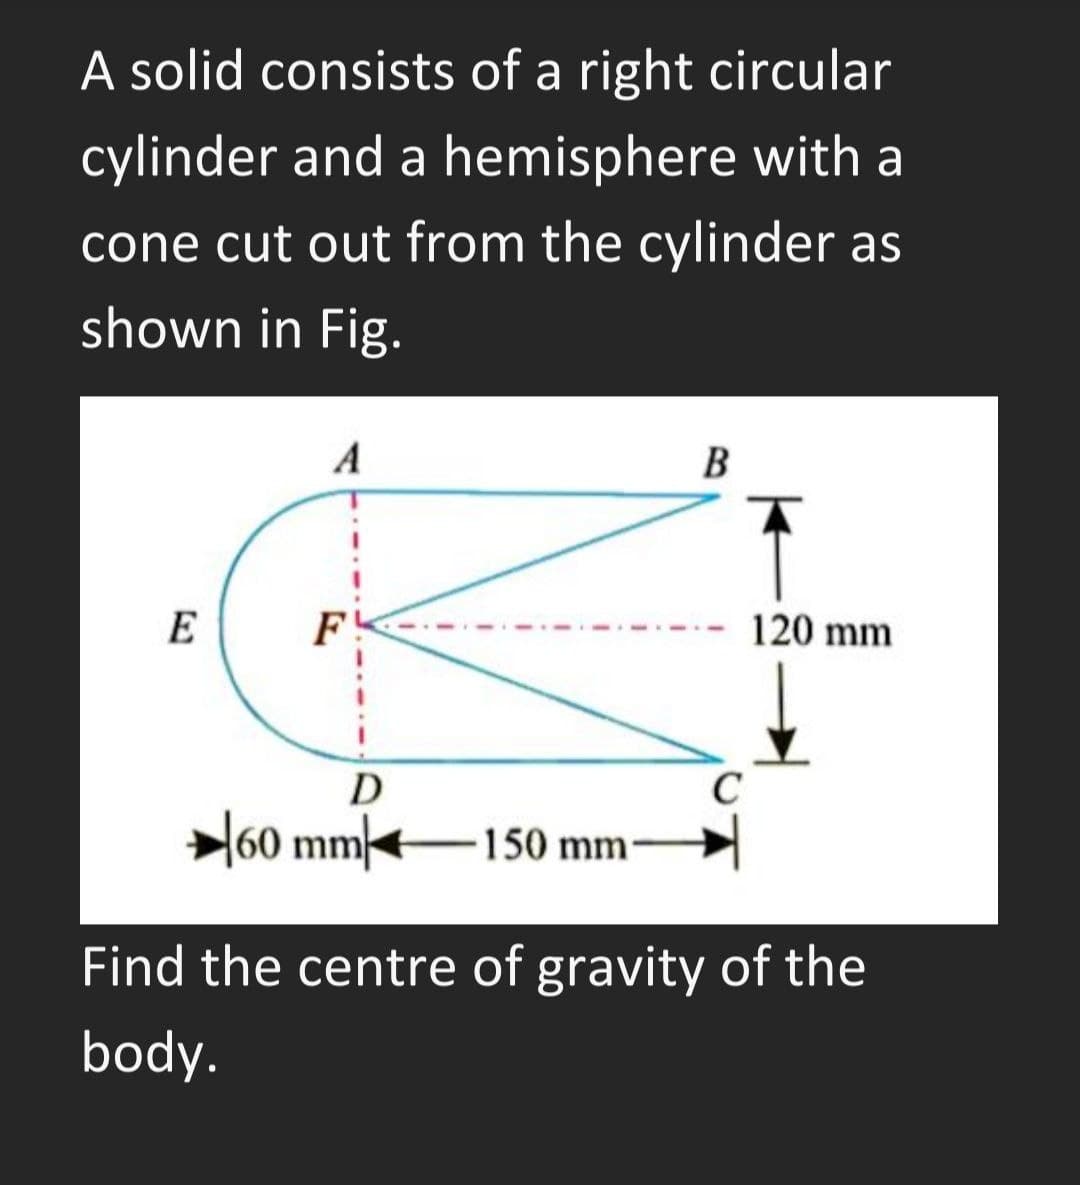 A solid consists of a right circular
cylinder and a hemisphere with a
cone cut out from the cylinder as
shown in Fig.
A
B
E
F
120 mm
D
C
l60 mm<
150 mm
Find the centre of gravity of the
body.
